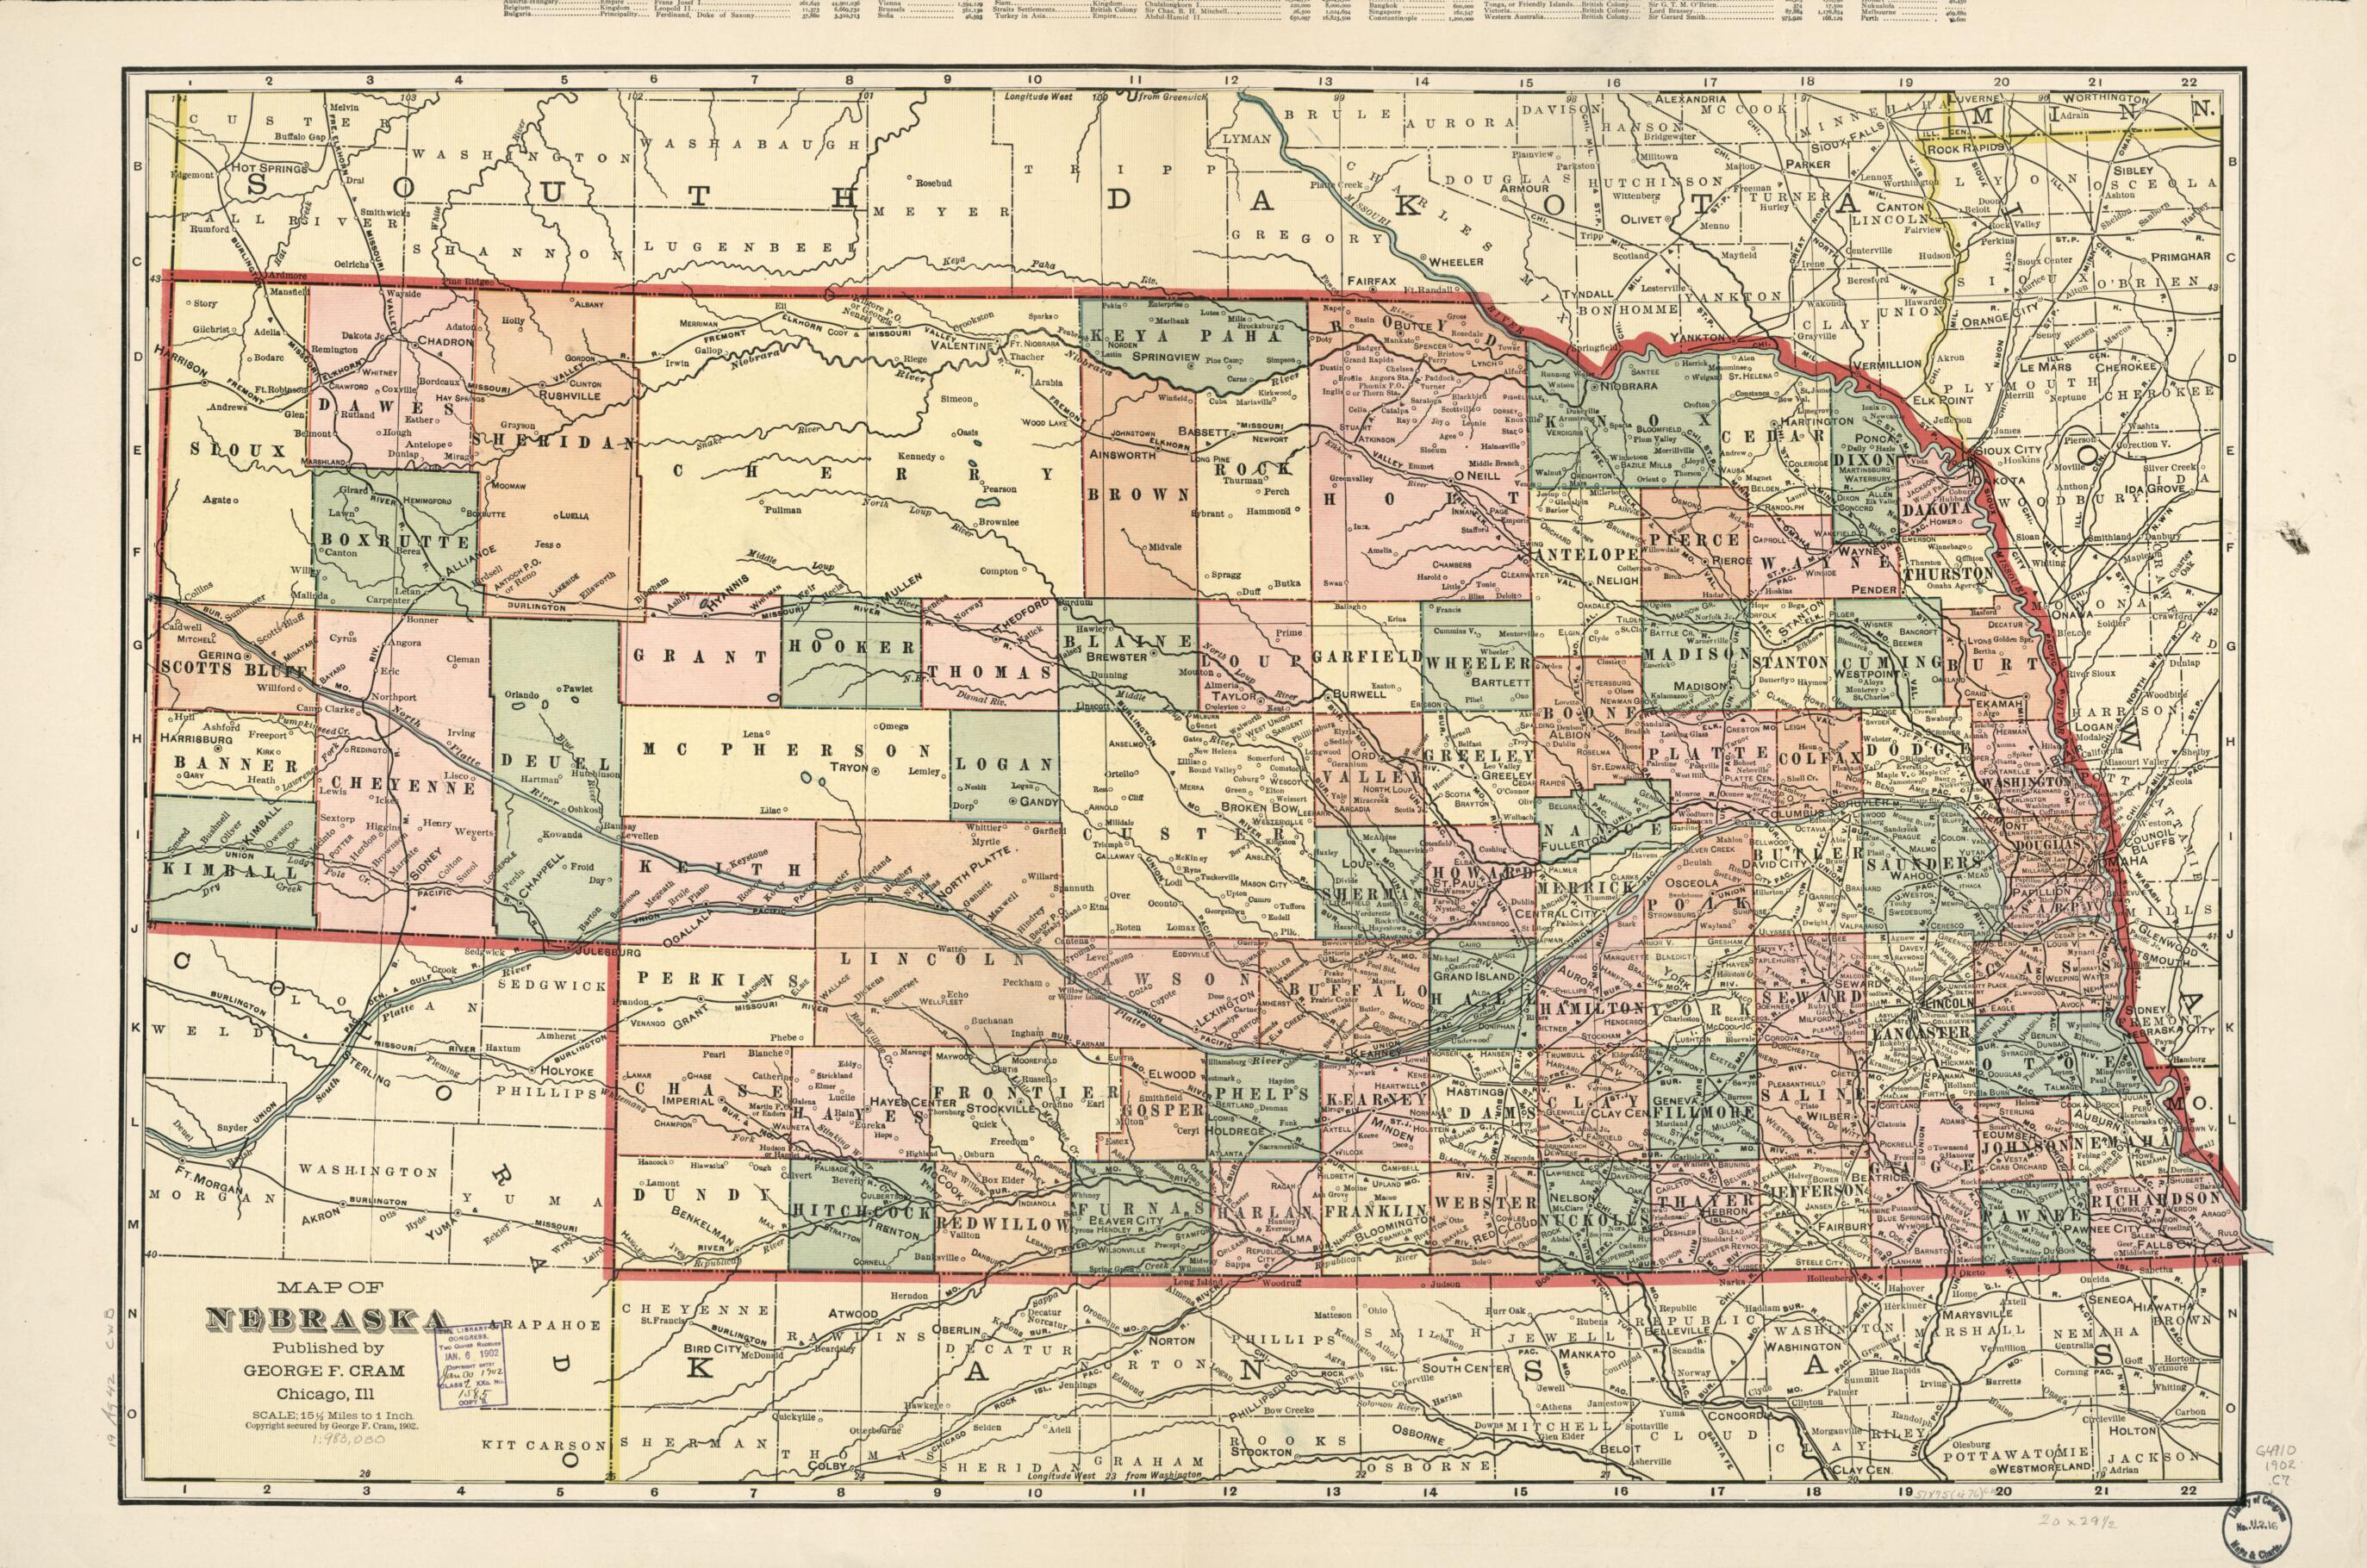 This old map of Map of Nebraska : United States : Population, 76,303,387 from 1902 was created by George Franklin Cram in 1902